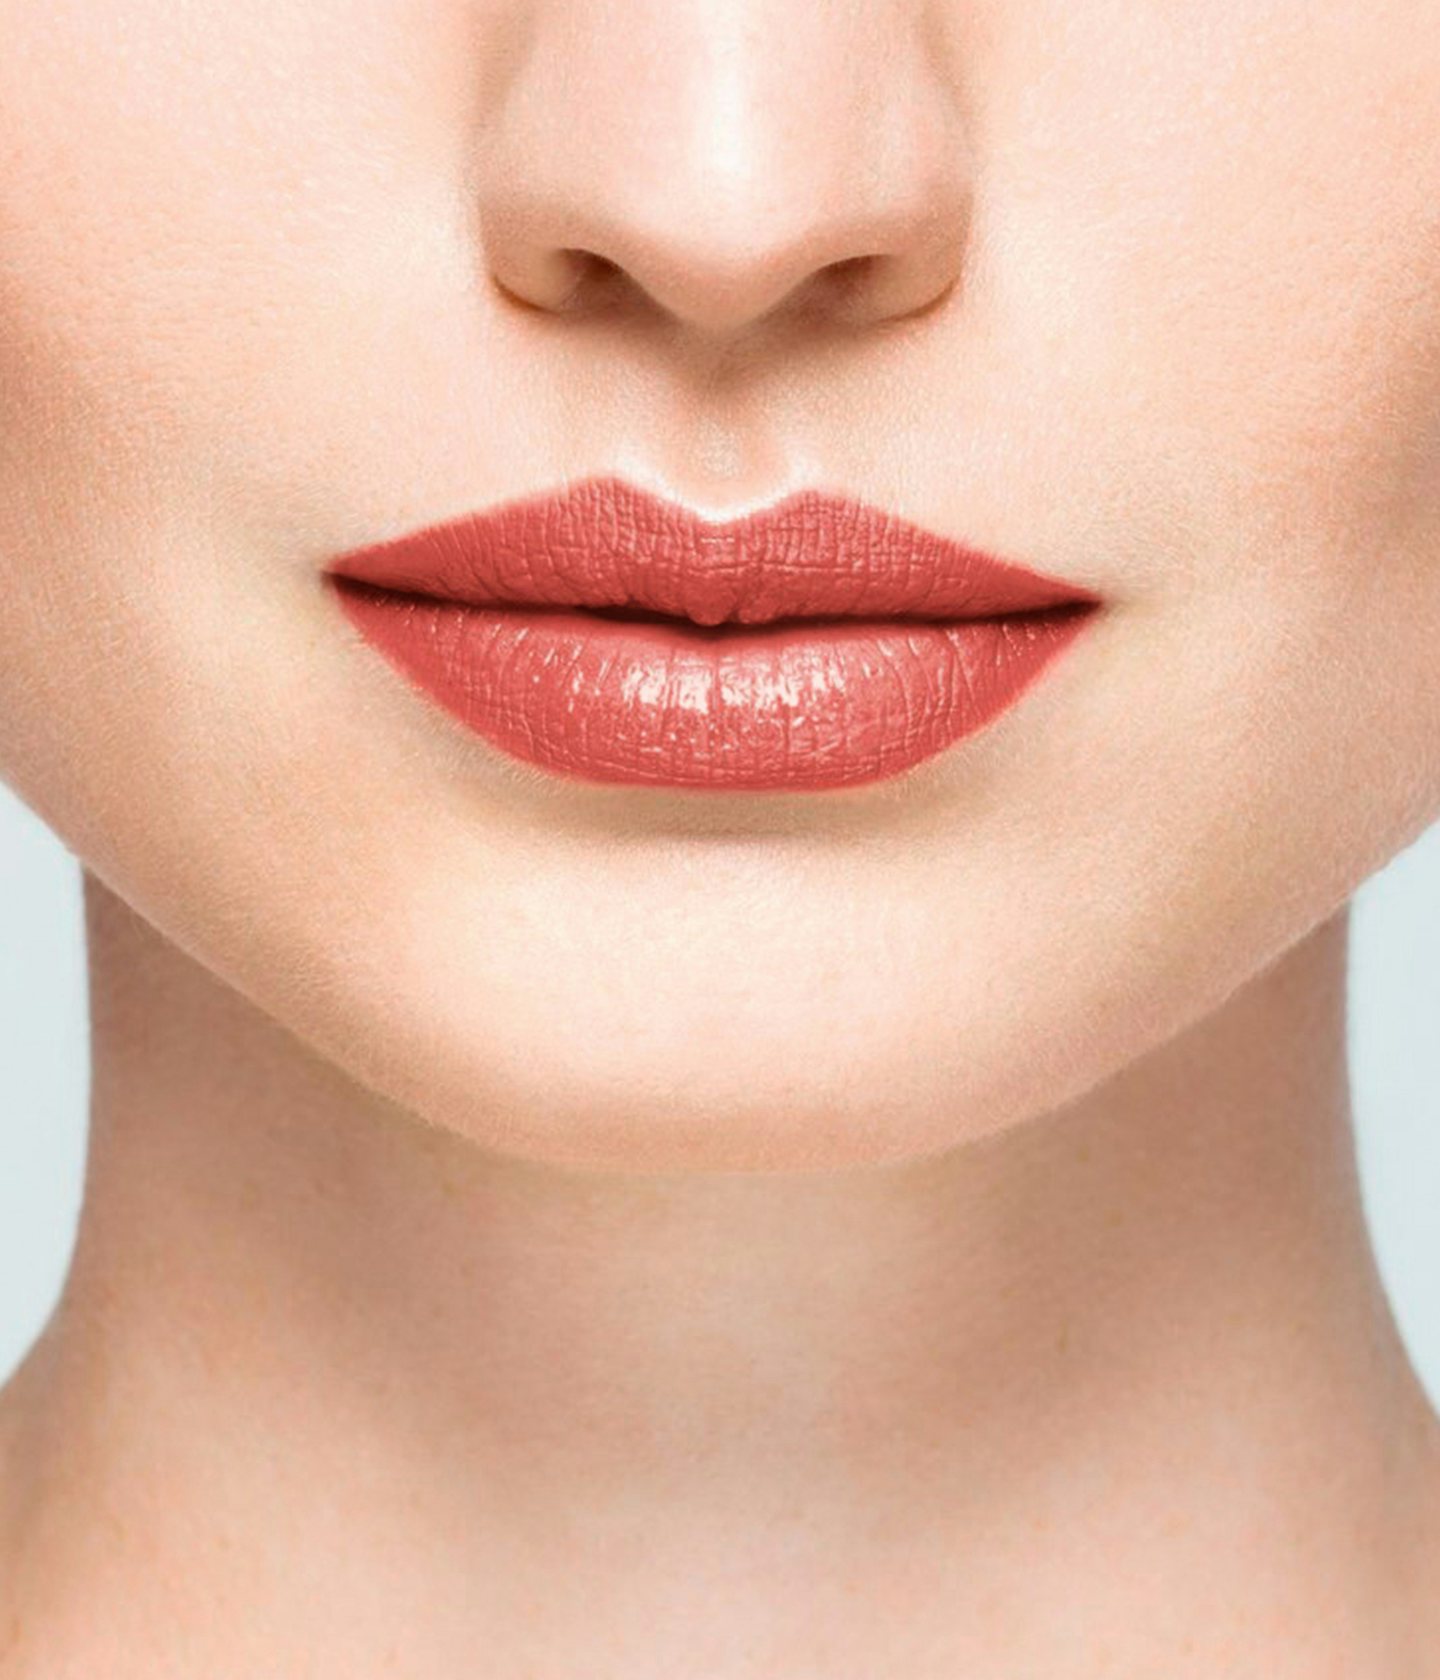 La bouche rouge Red balm lipstick shade on the lips of a fair skin model